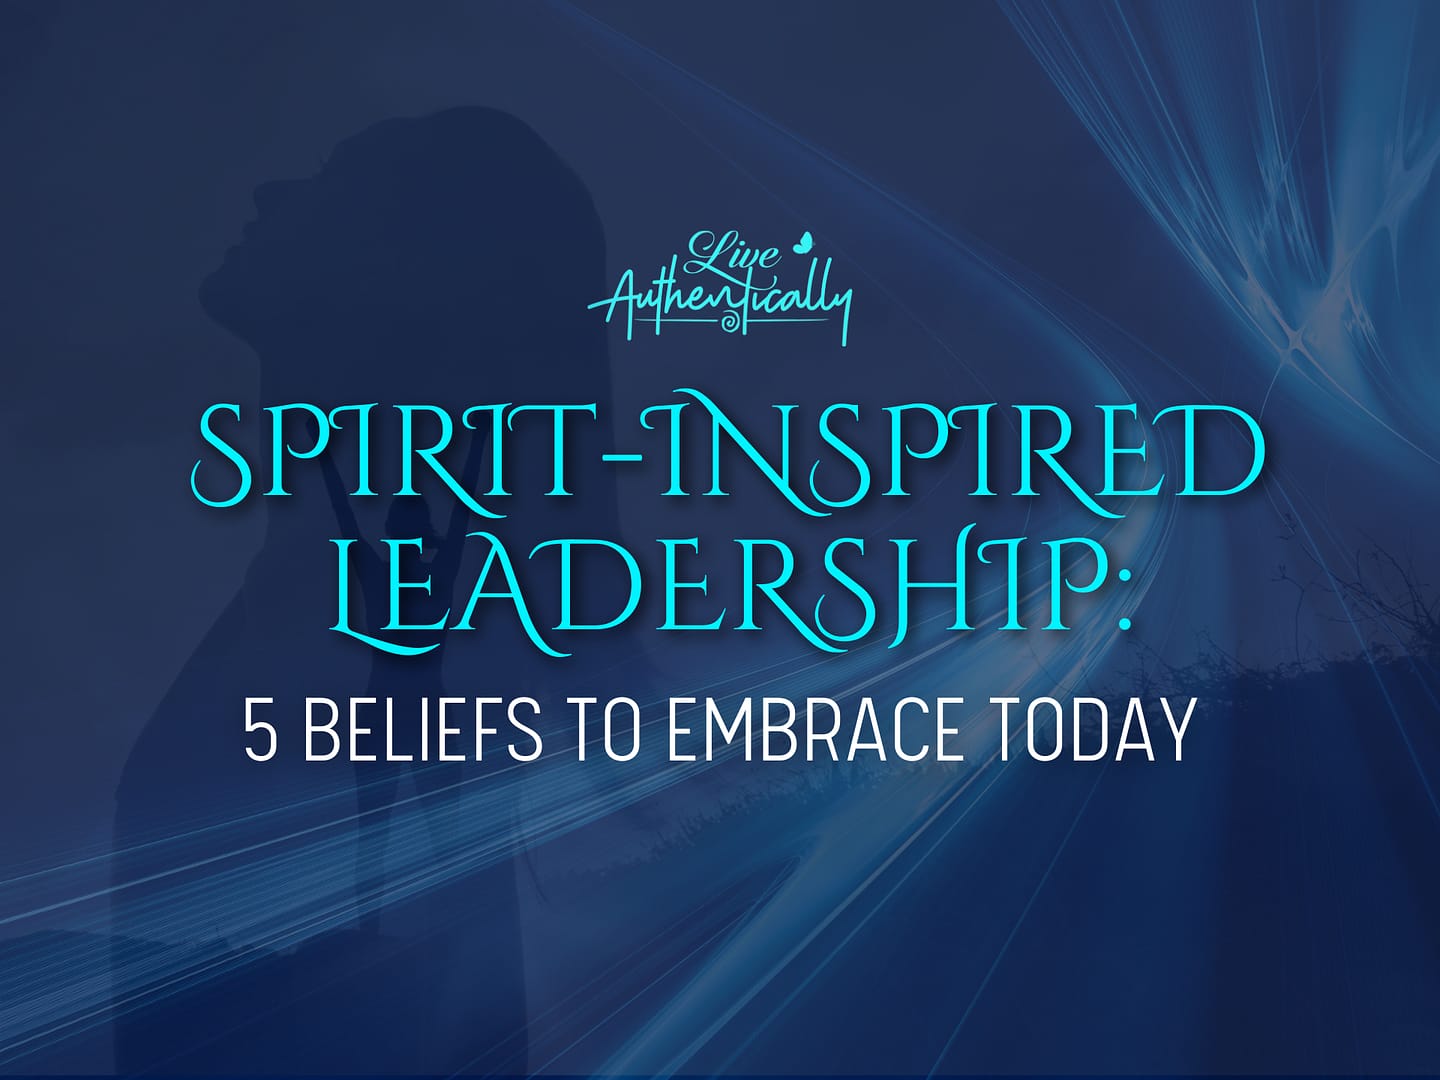 5 Beliefs to Embrace Today